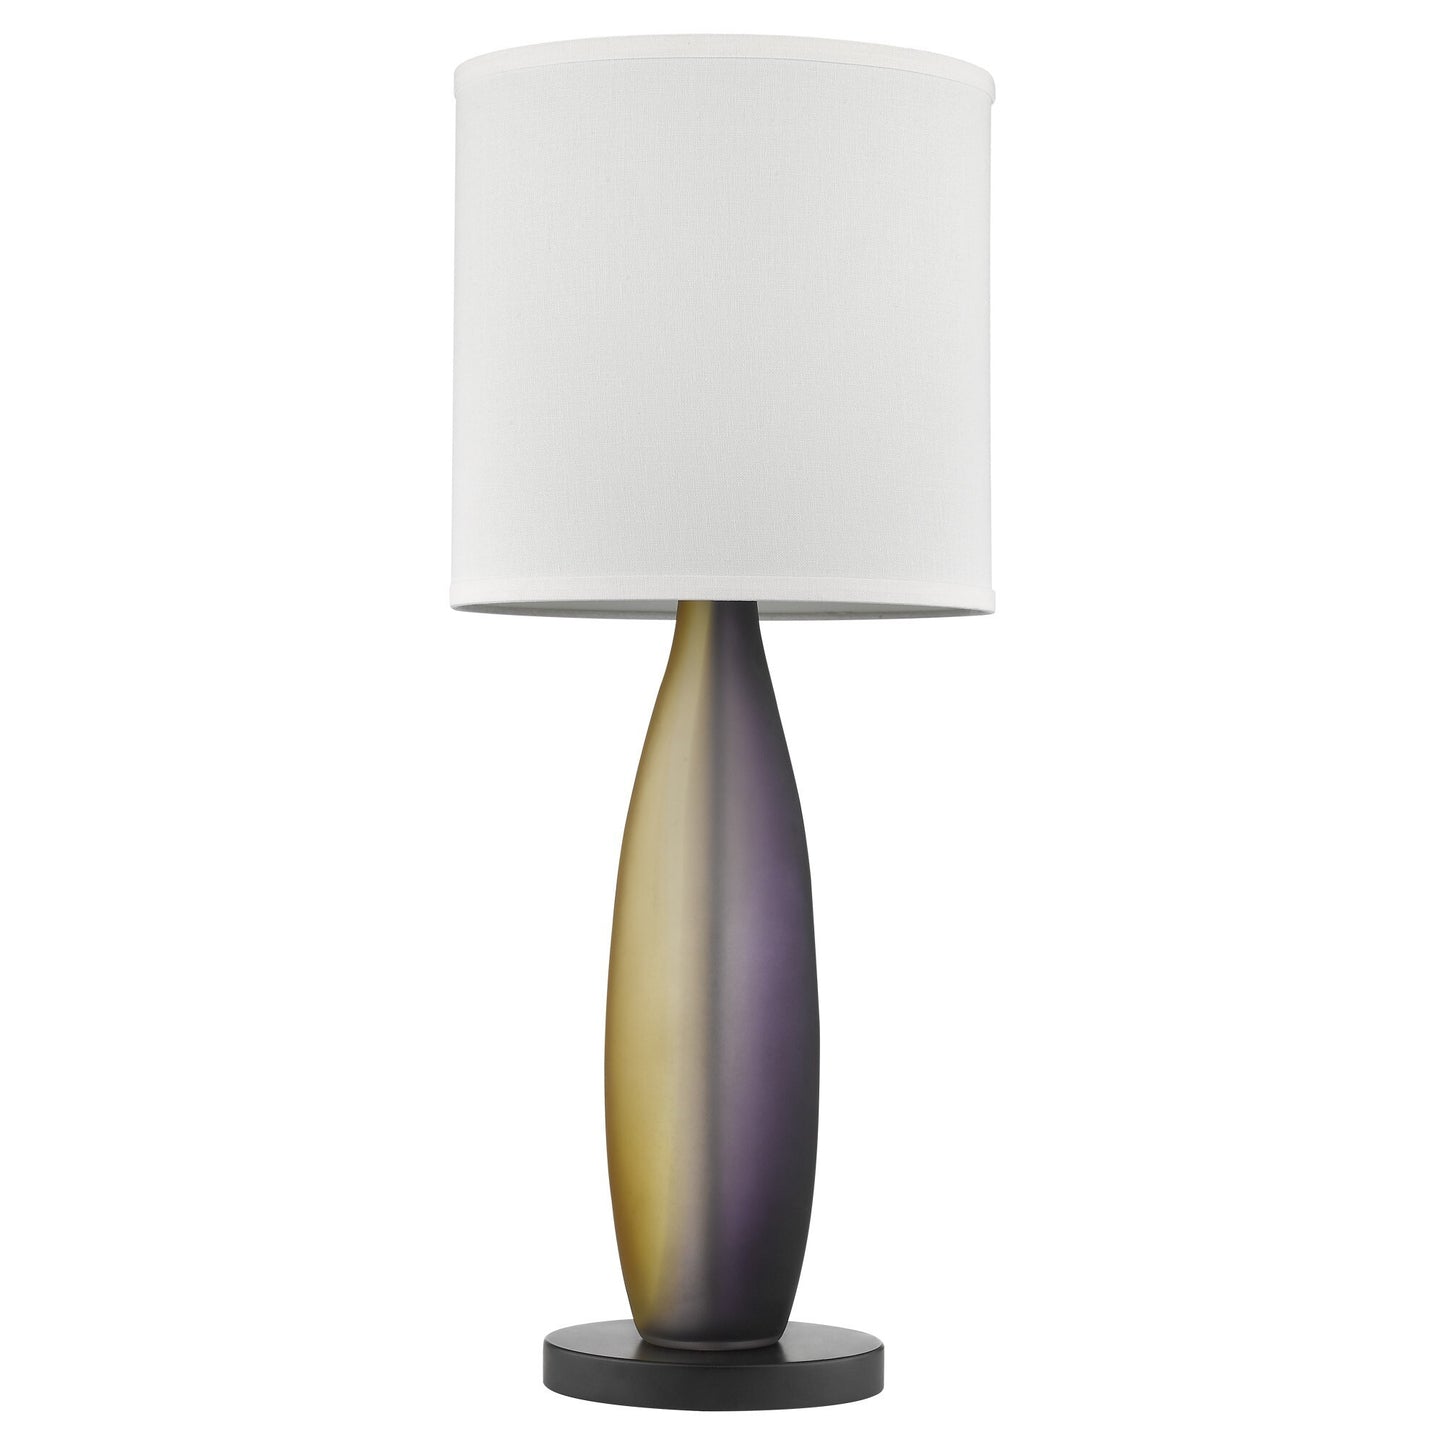 Elixer 1-Light Plum/Gold Frosted Glass And Ebony Lacquer Table Lamp With Lattice Cream Linen Shade